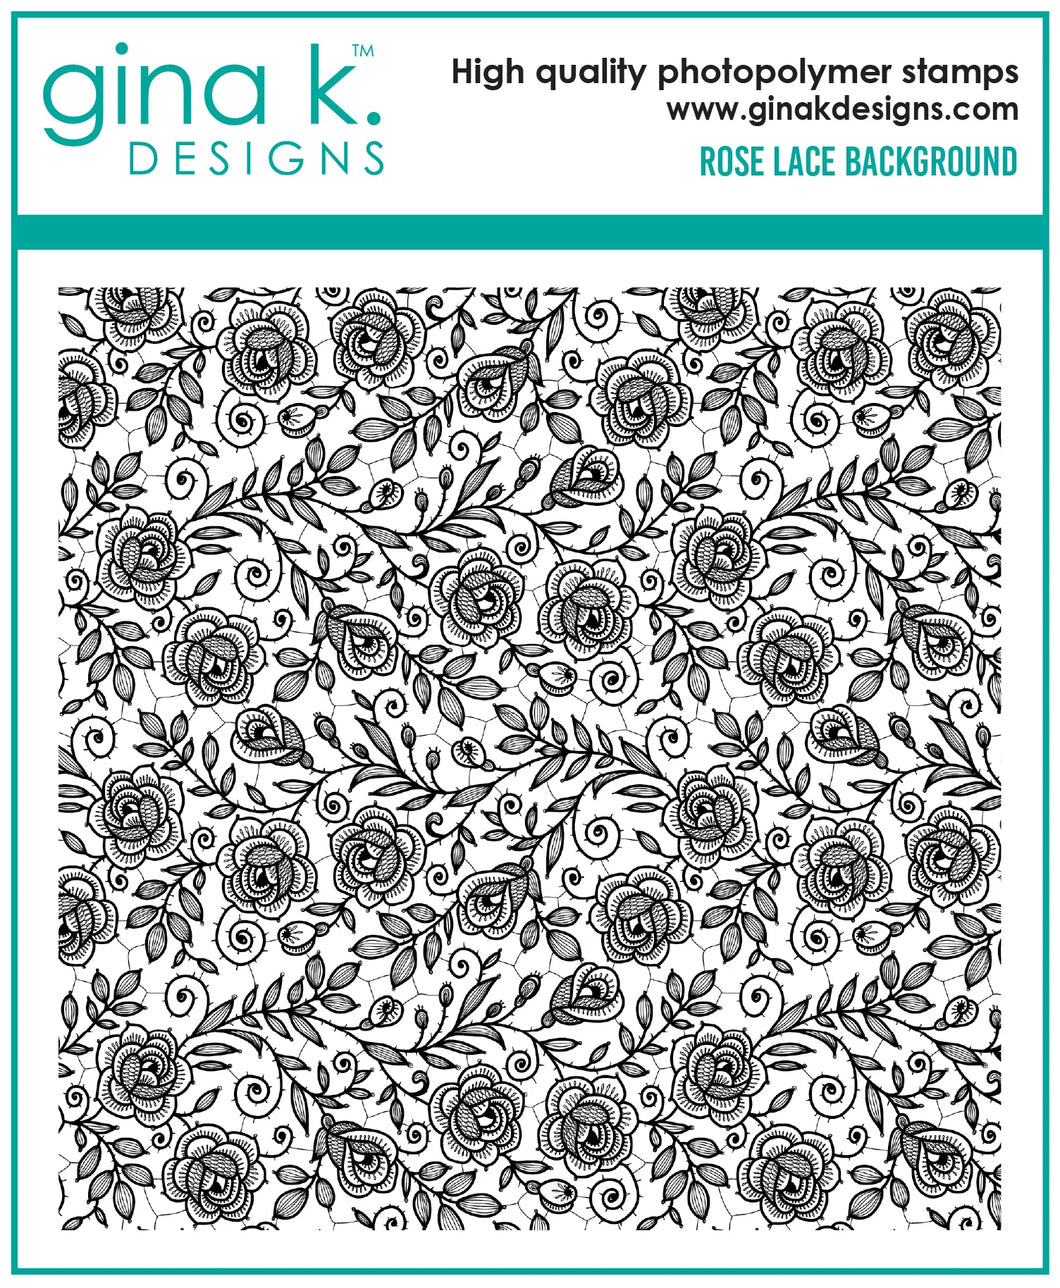 Gina K. Designs - Background Stamp - Rose Lace. Rose Lace is a stamp set by Gina K Designs. This set is made of premium clear photopolymer and measures 6